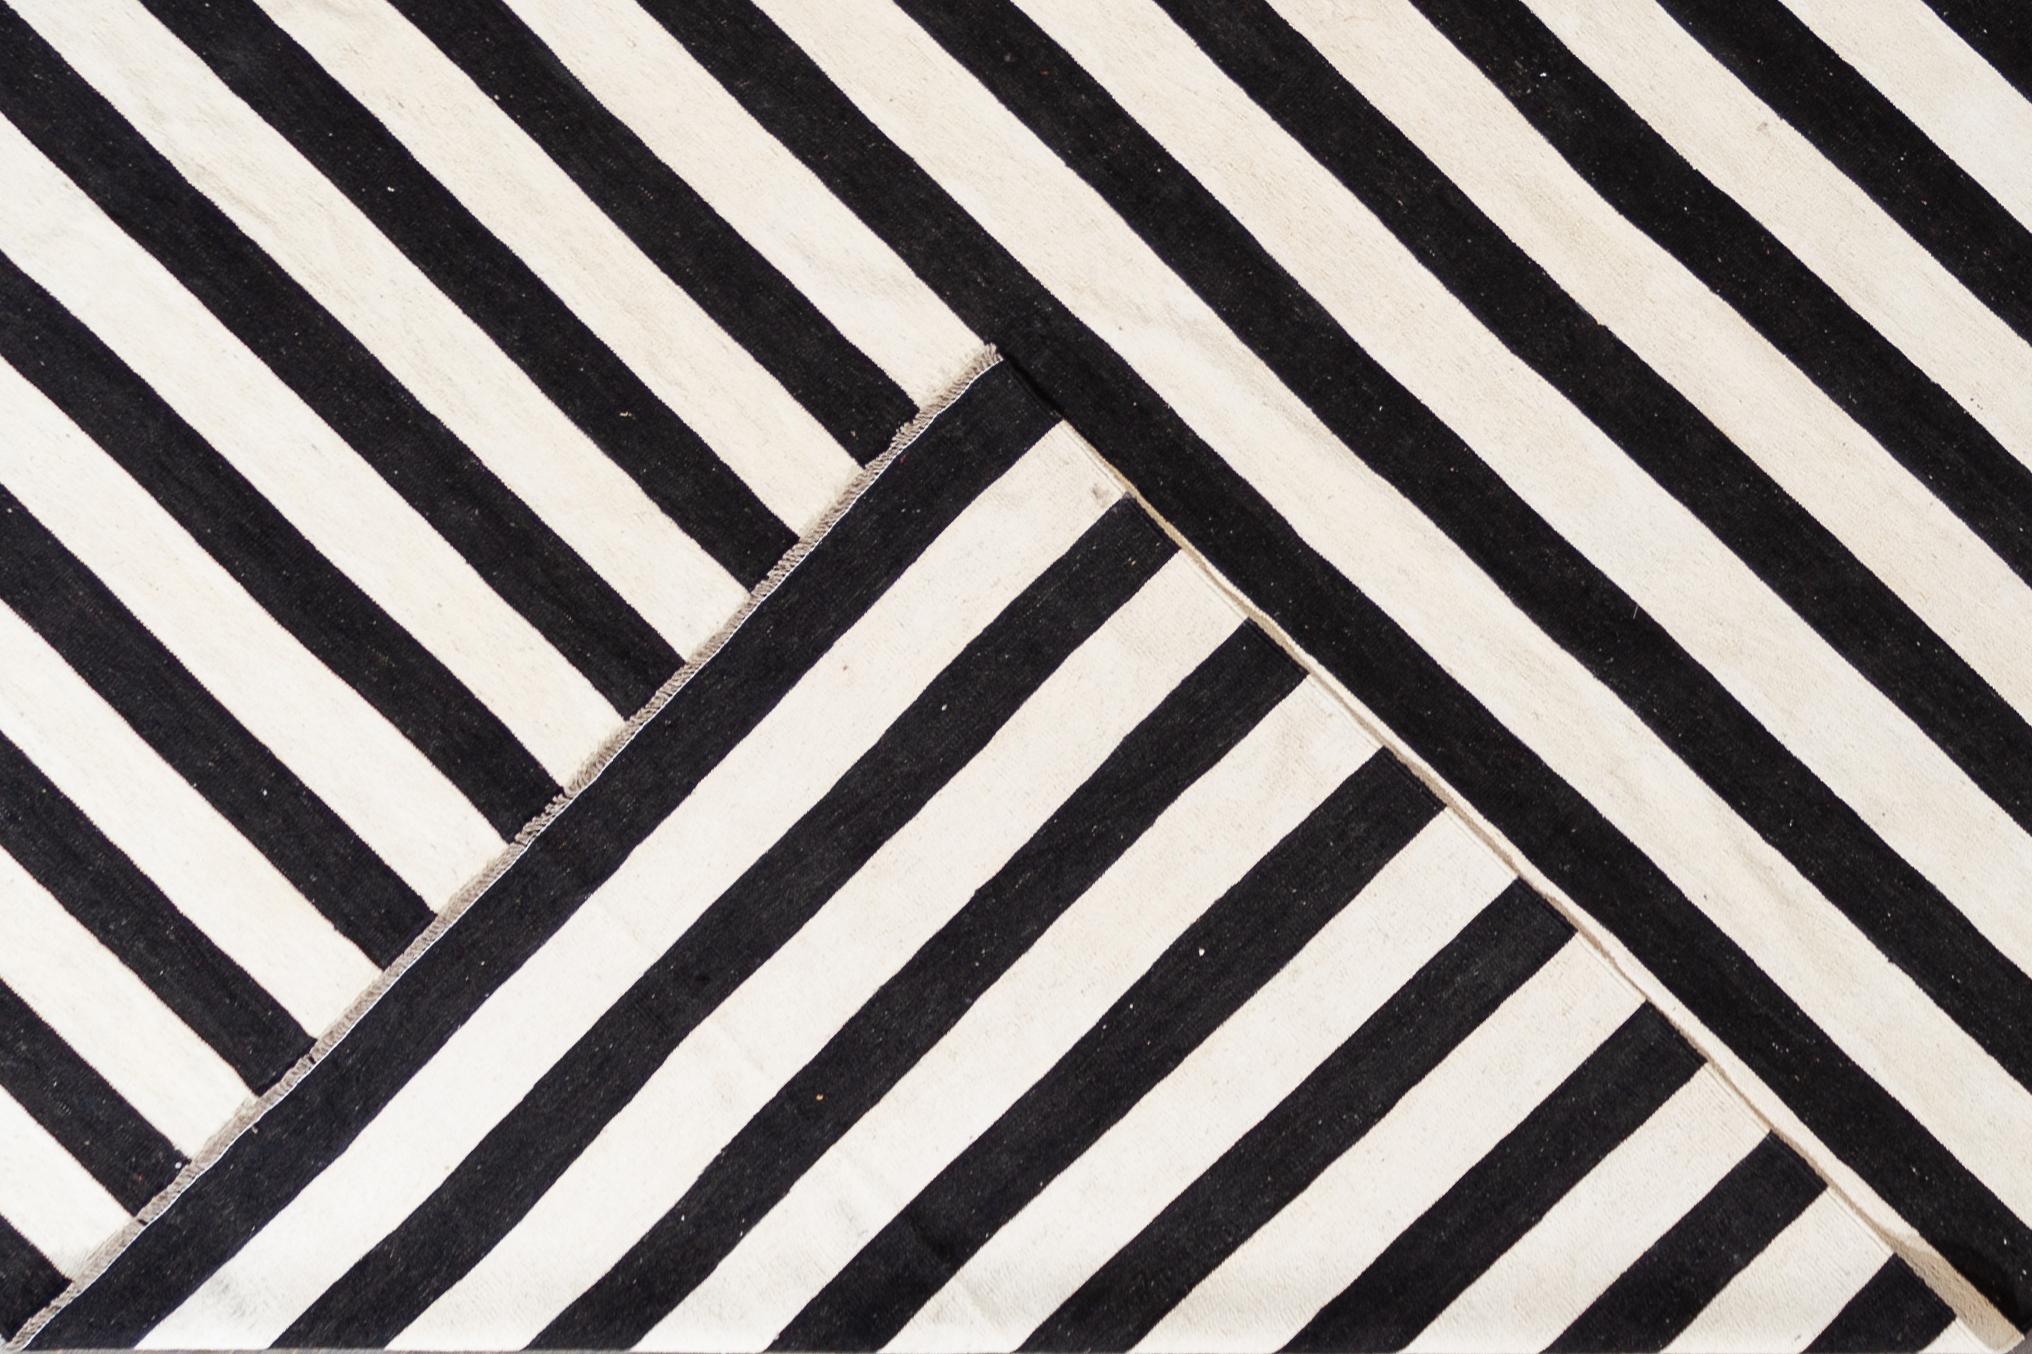 Beautiful 21st Century Contemporary Kilim Rug, hand-woven wool in an allover black and white striped design.

This rug measures 12' 5